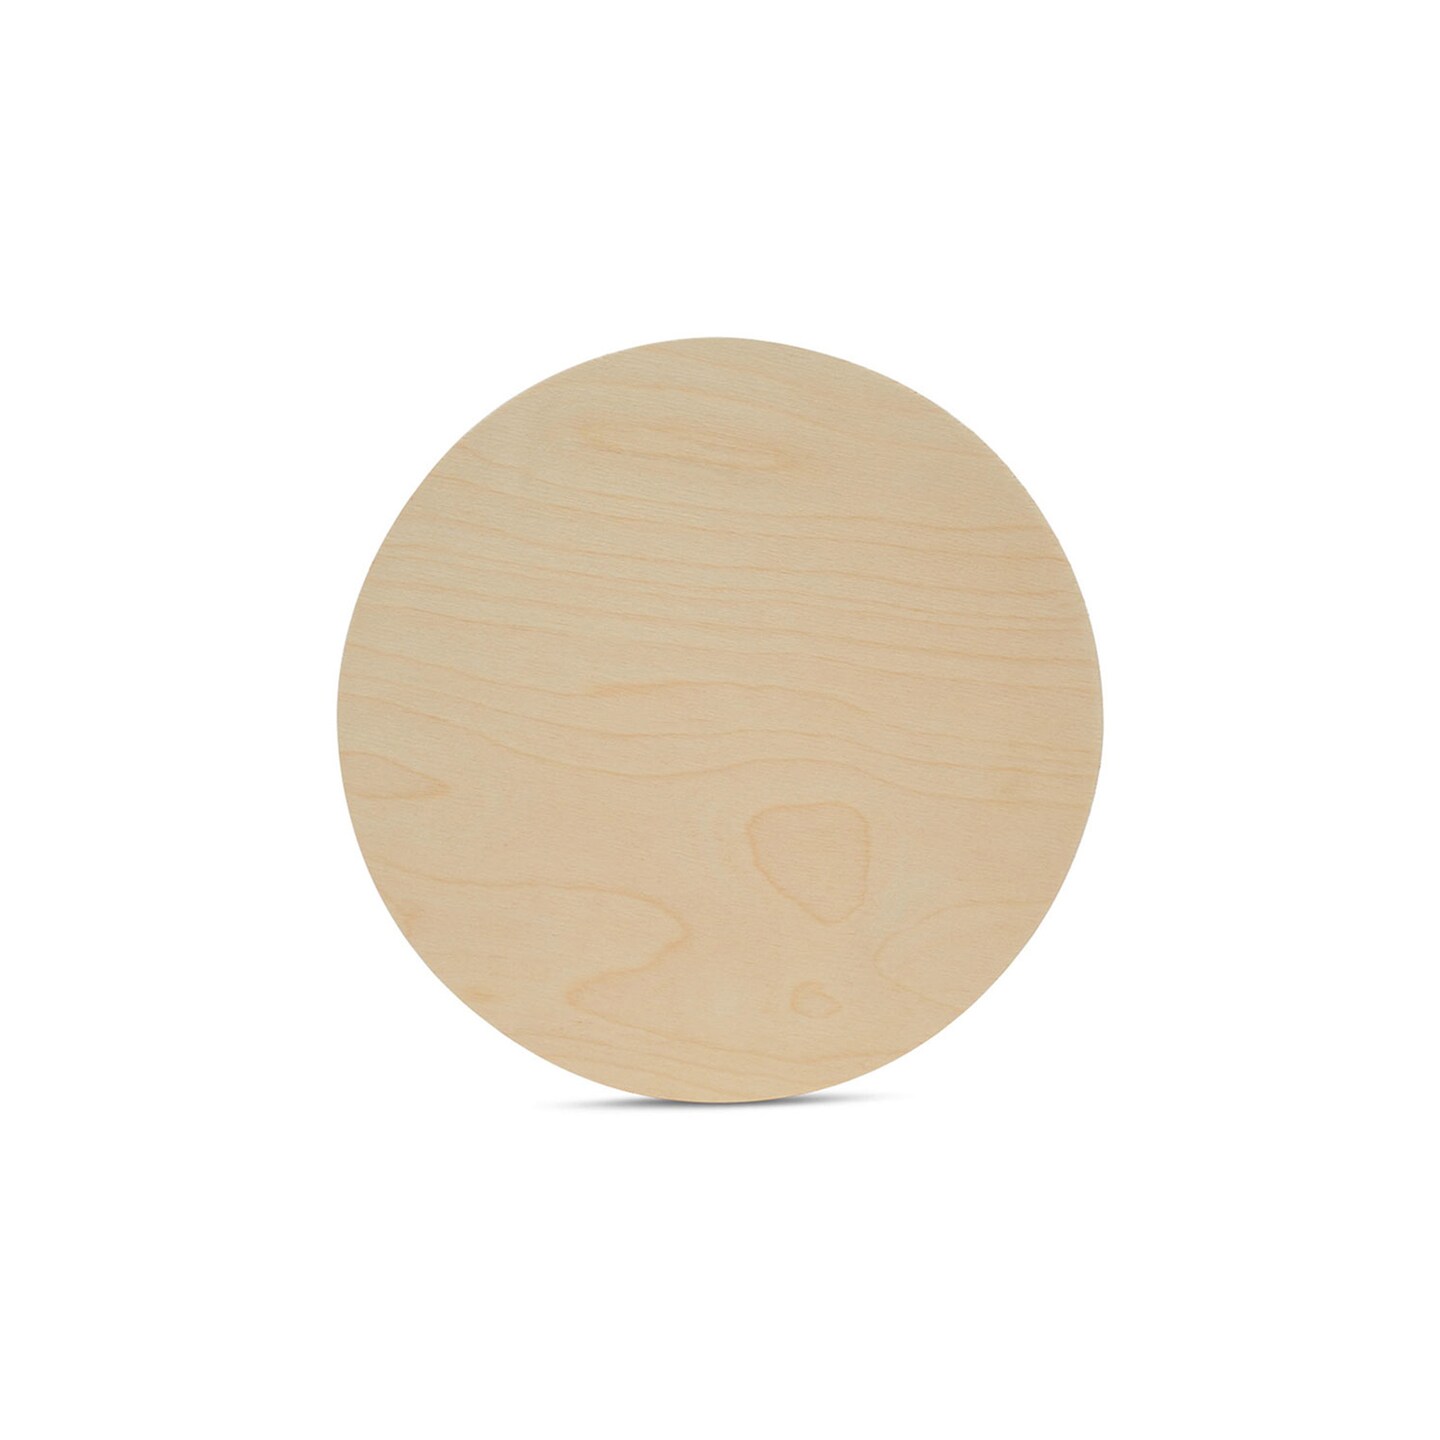 Unfinished Wood Circles for Crafts, Wood Burning, Engraving (4 In, 15 Pack)